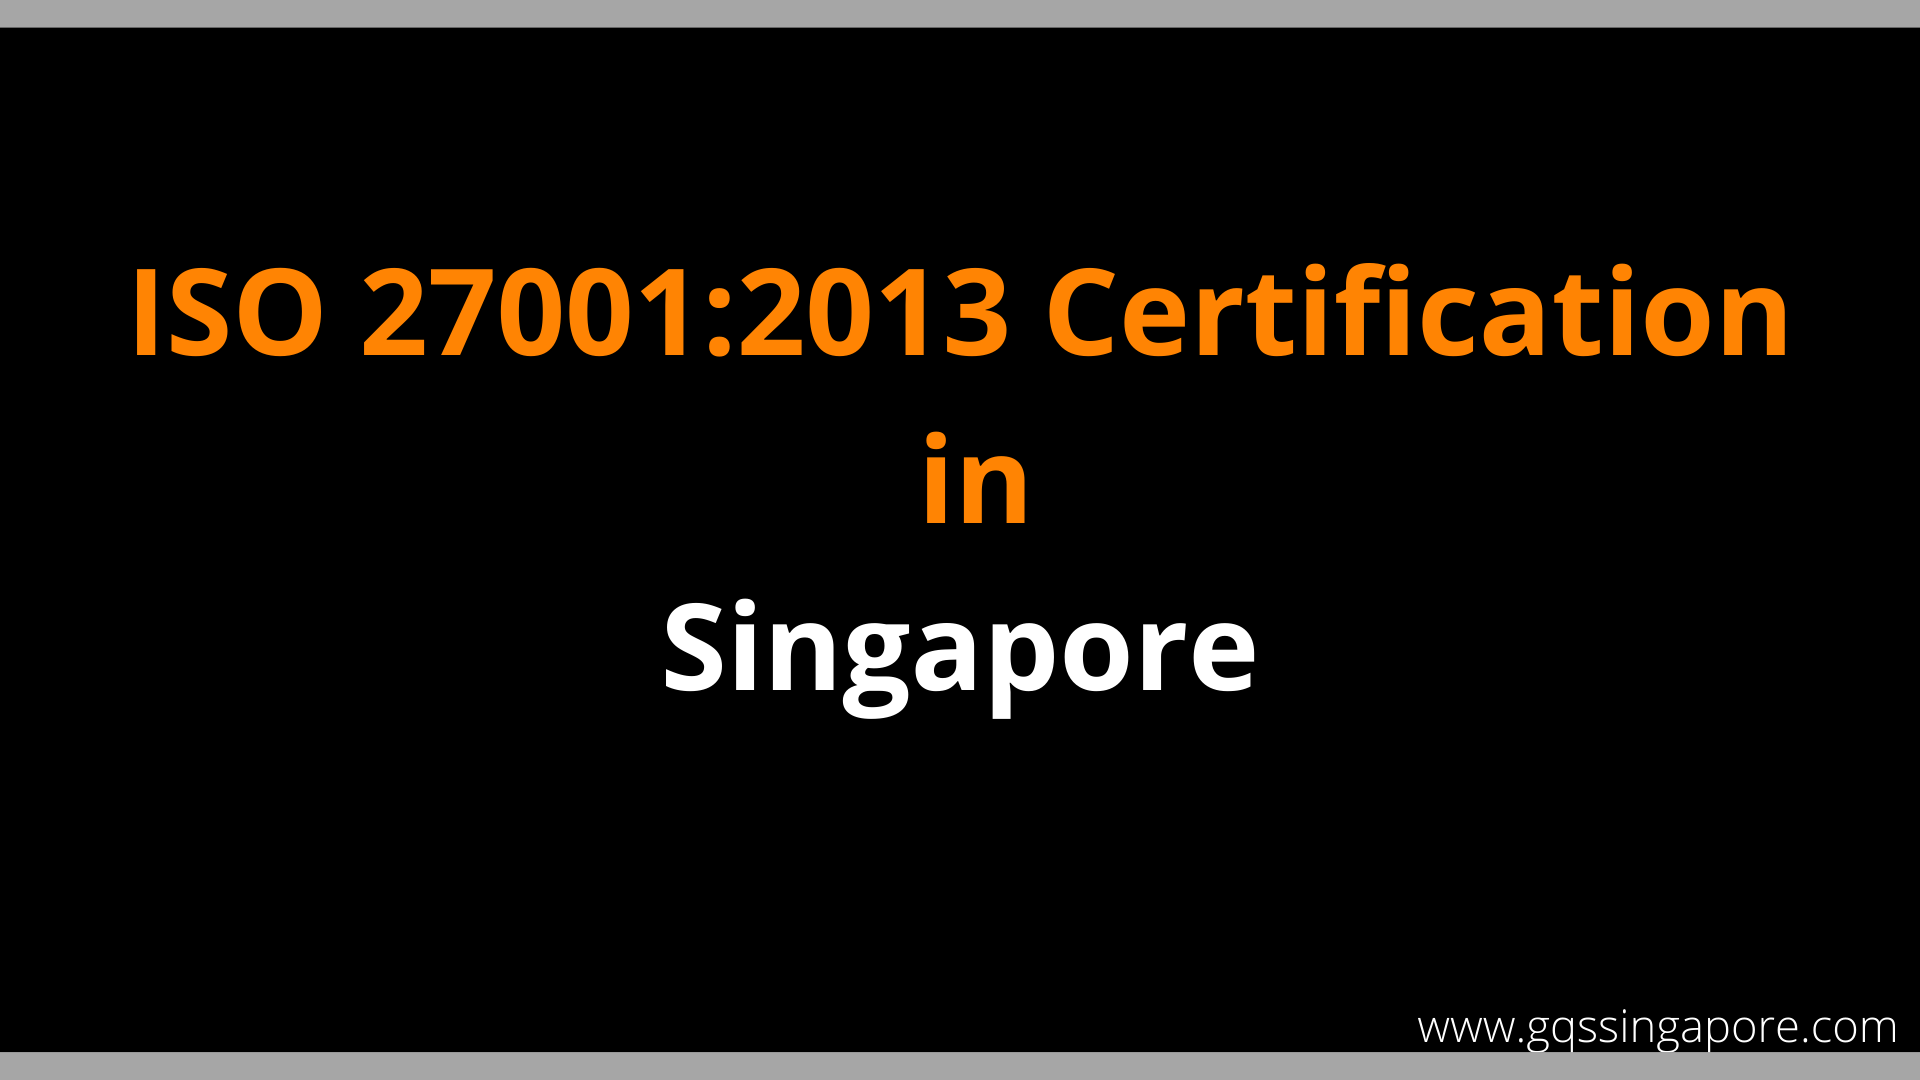 How to get ISO 27001:2013 certification in Singapore ?